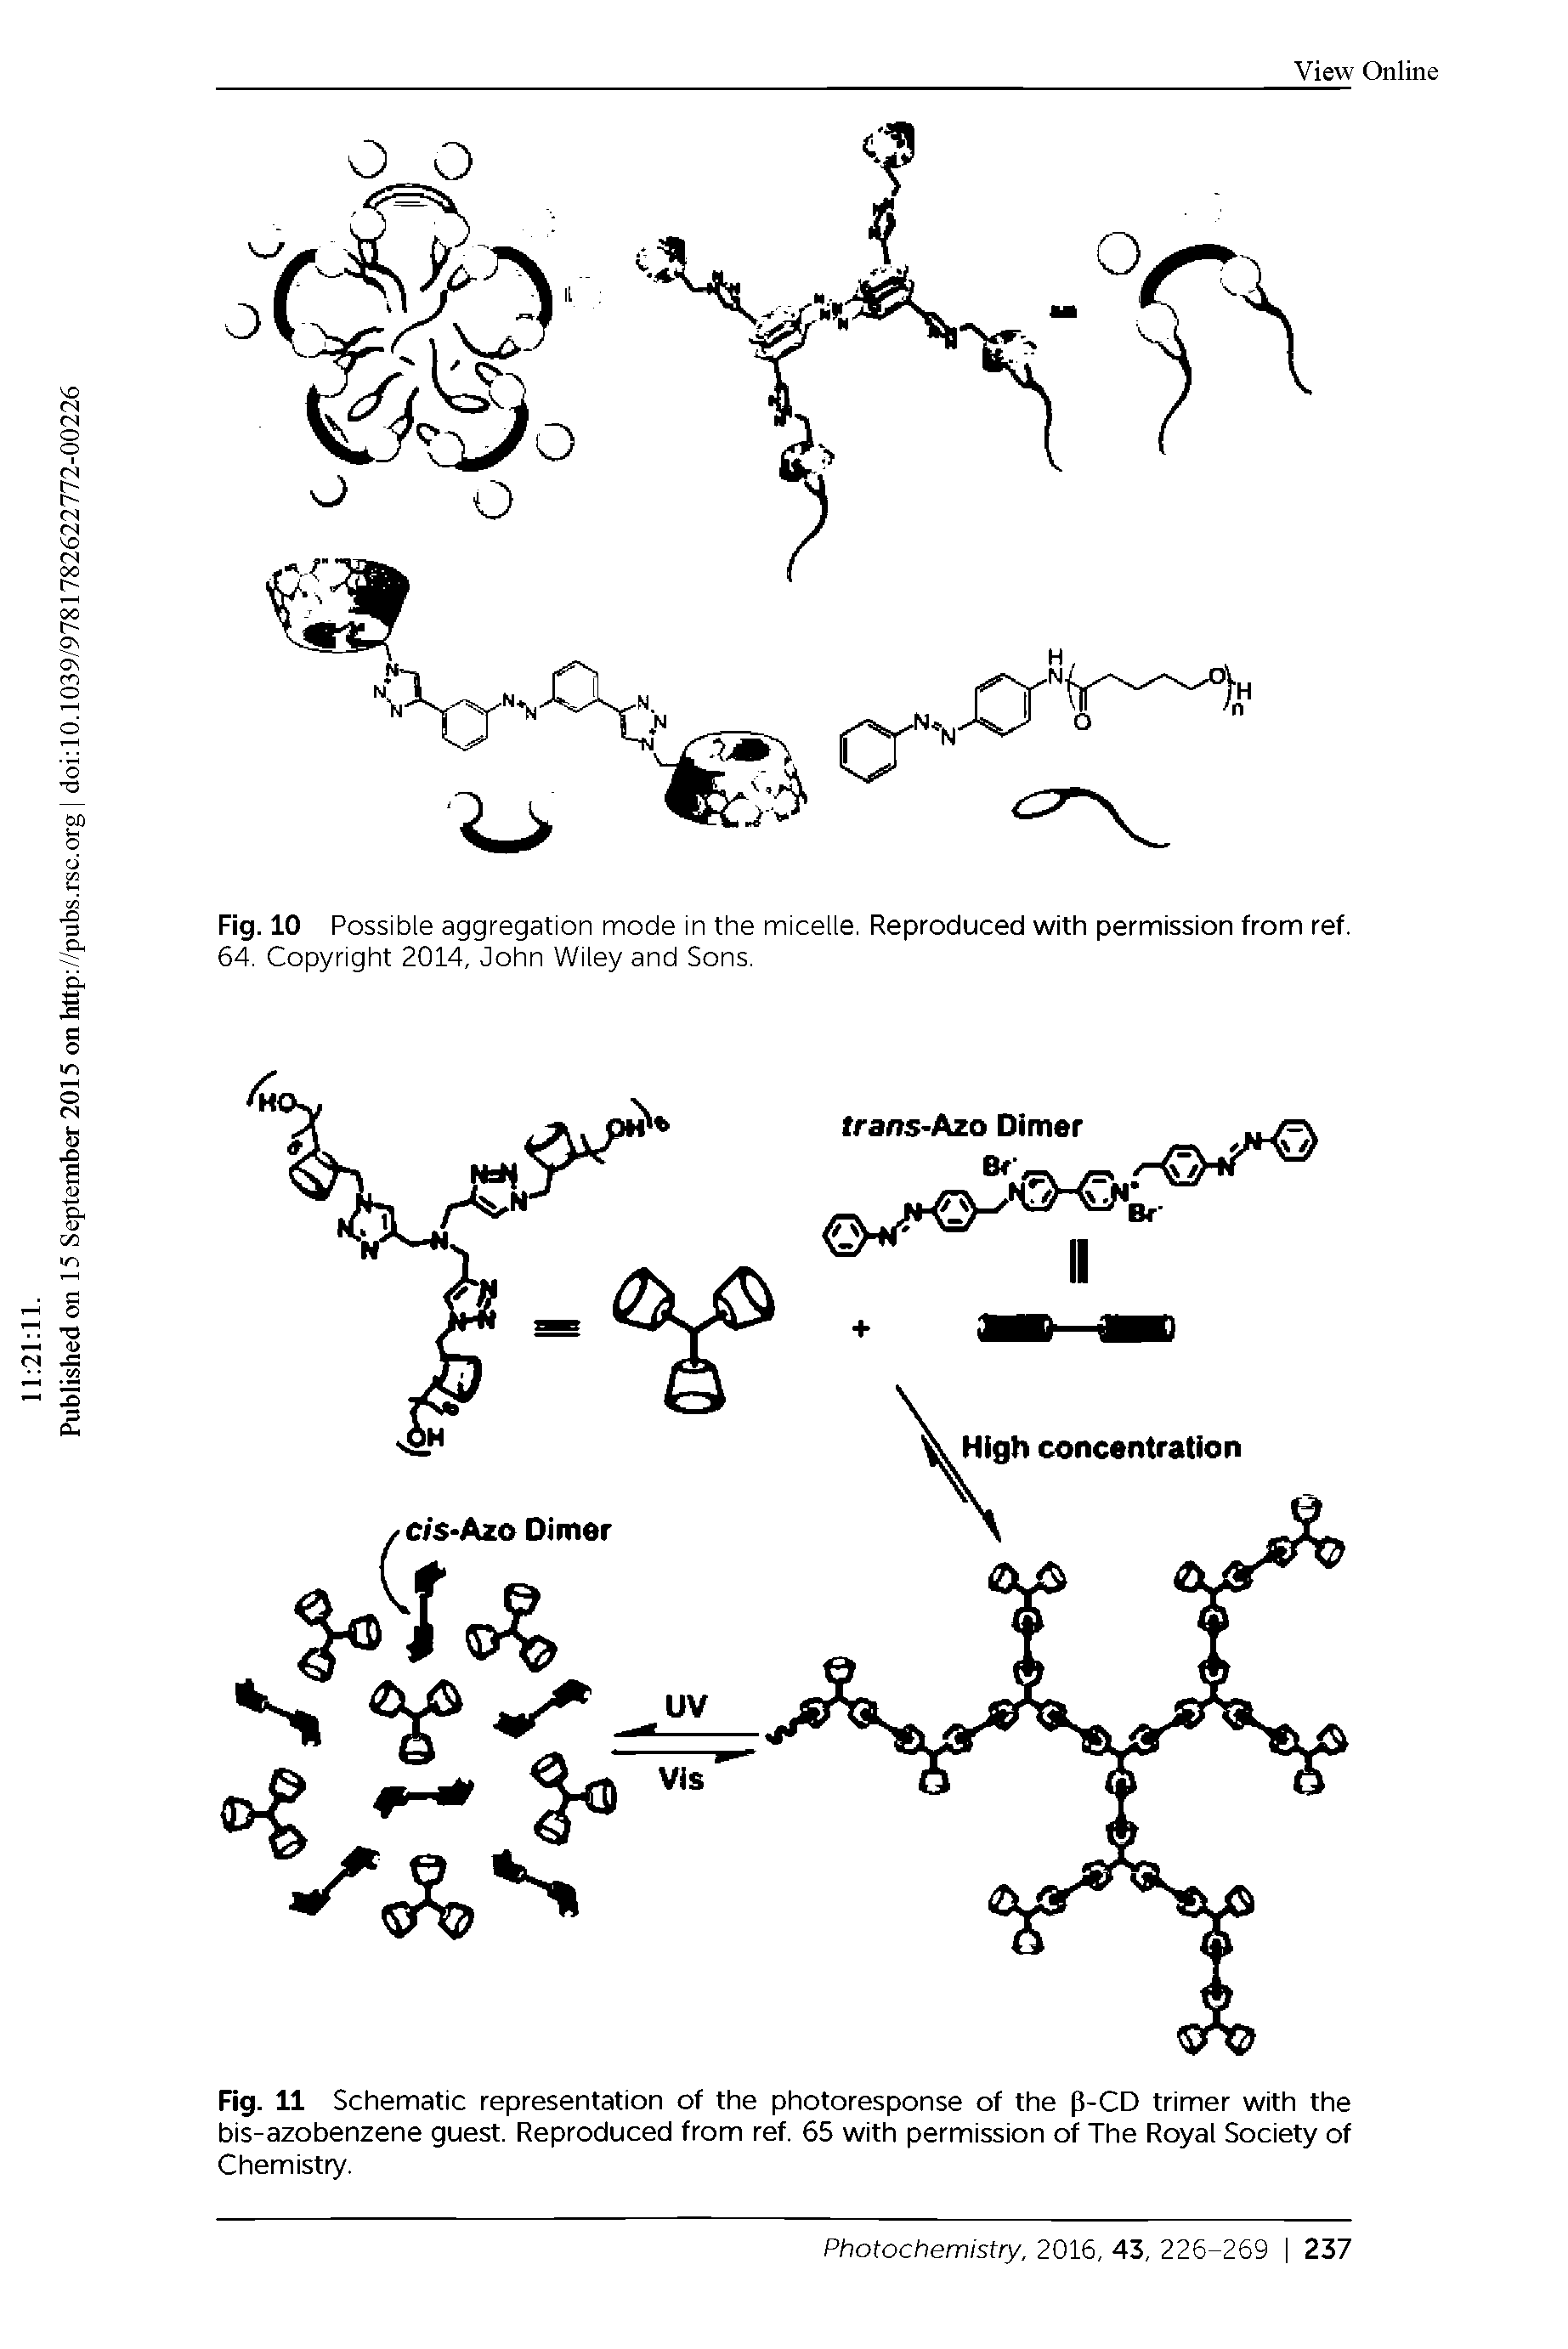 Fig. 11 Schematic representation of the photoresponse of the p-CD trimer with the bis-azobenzene guest. Reproduced from ref. 65 with permission of The Royal Society of Chemistry.